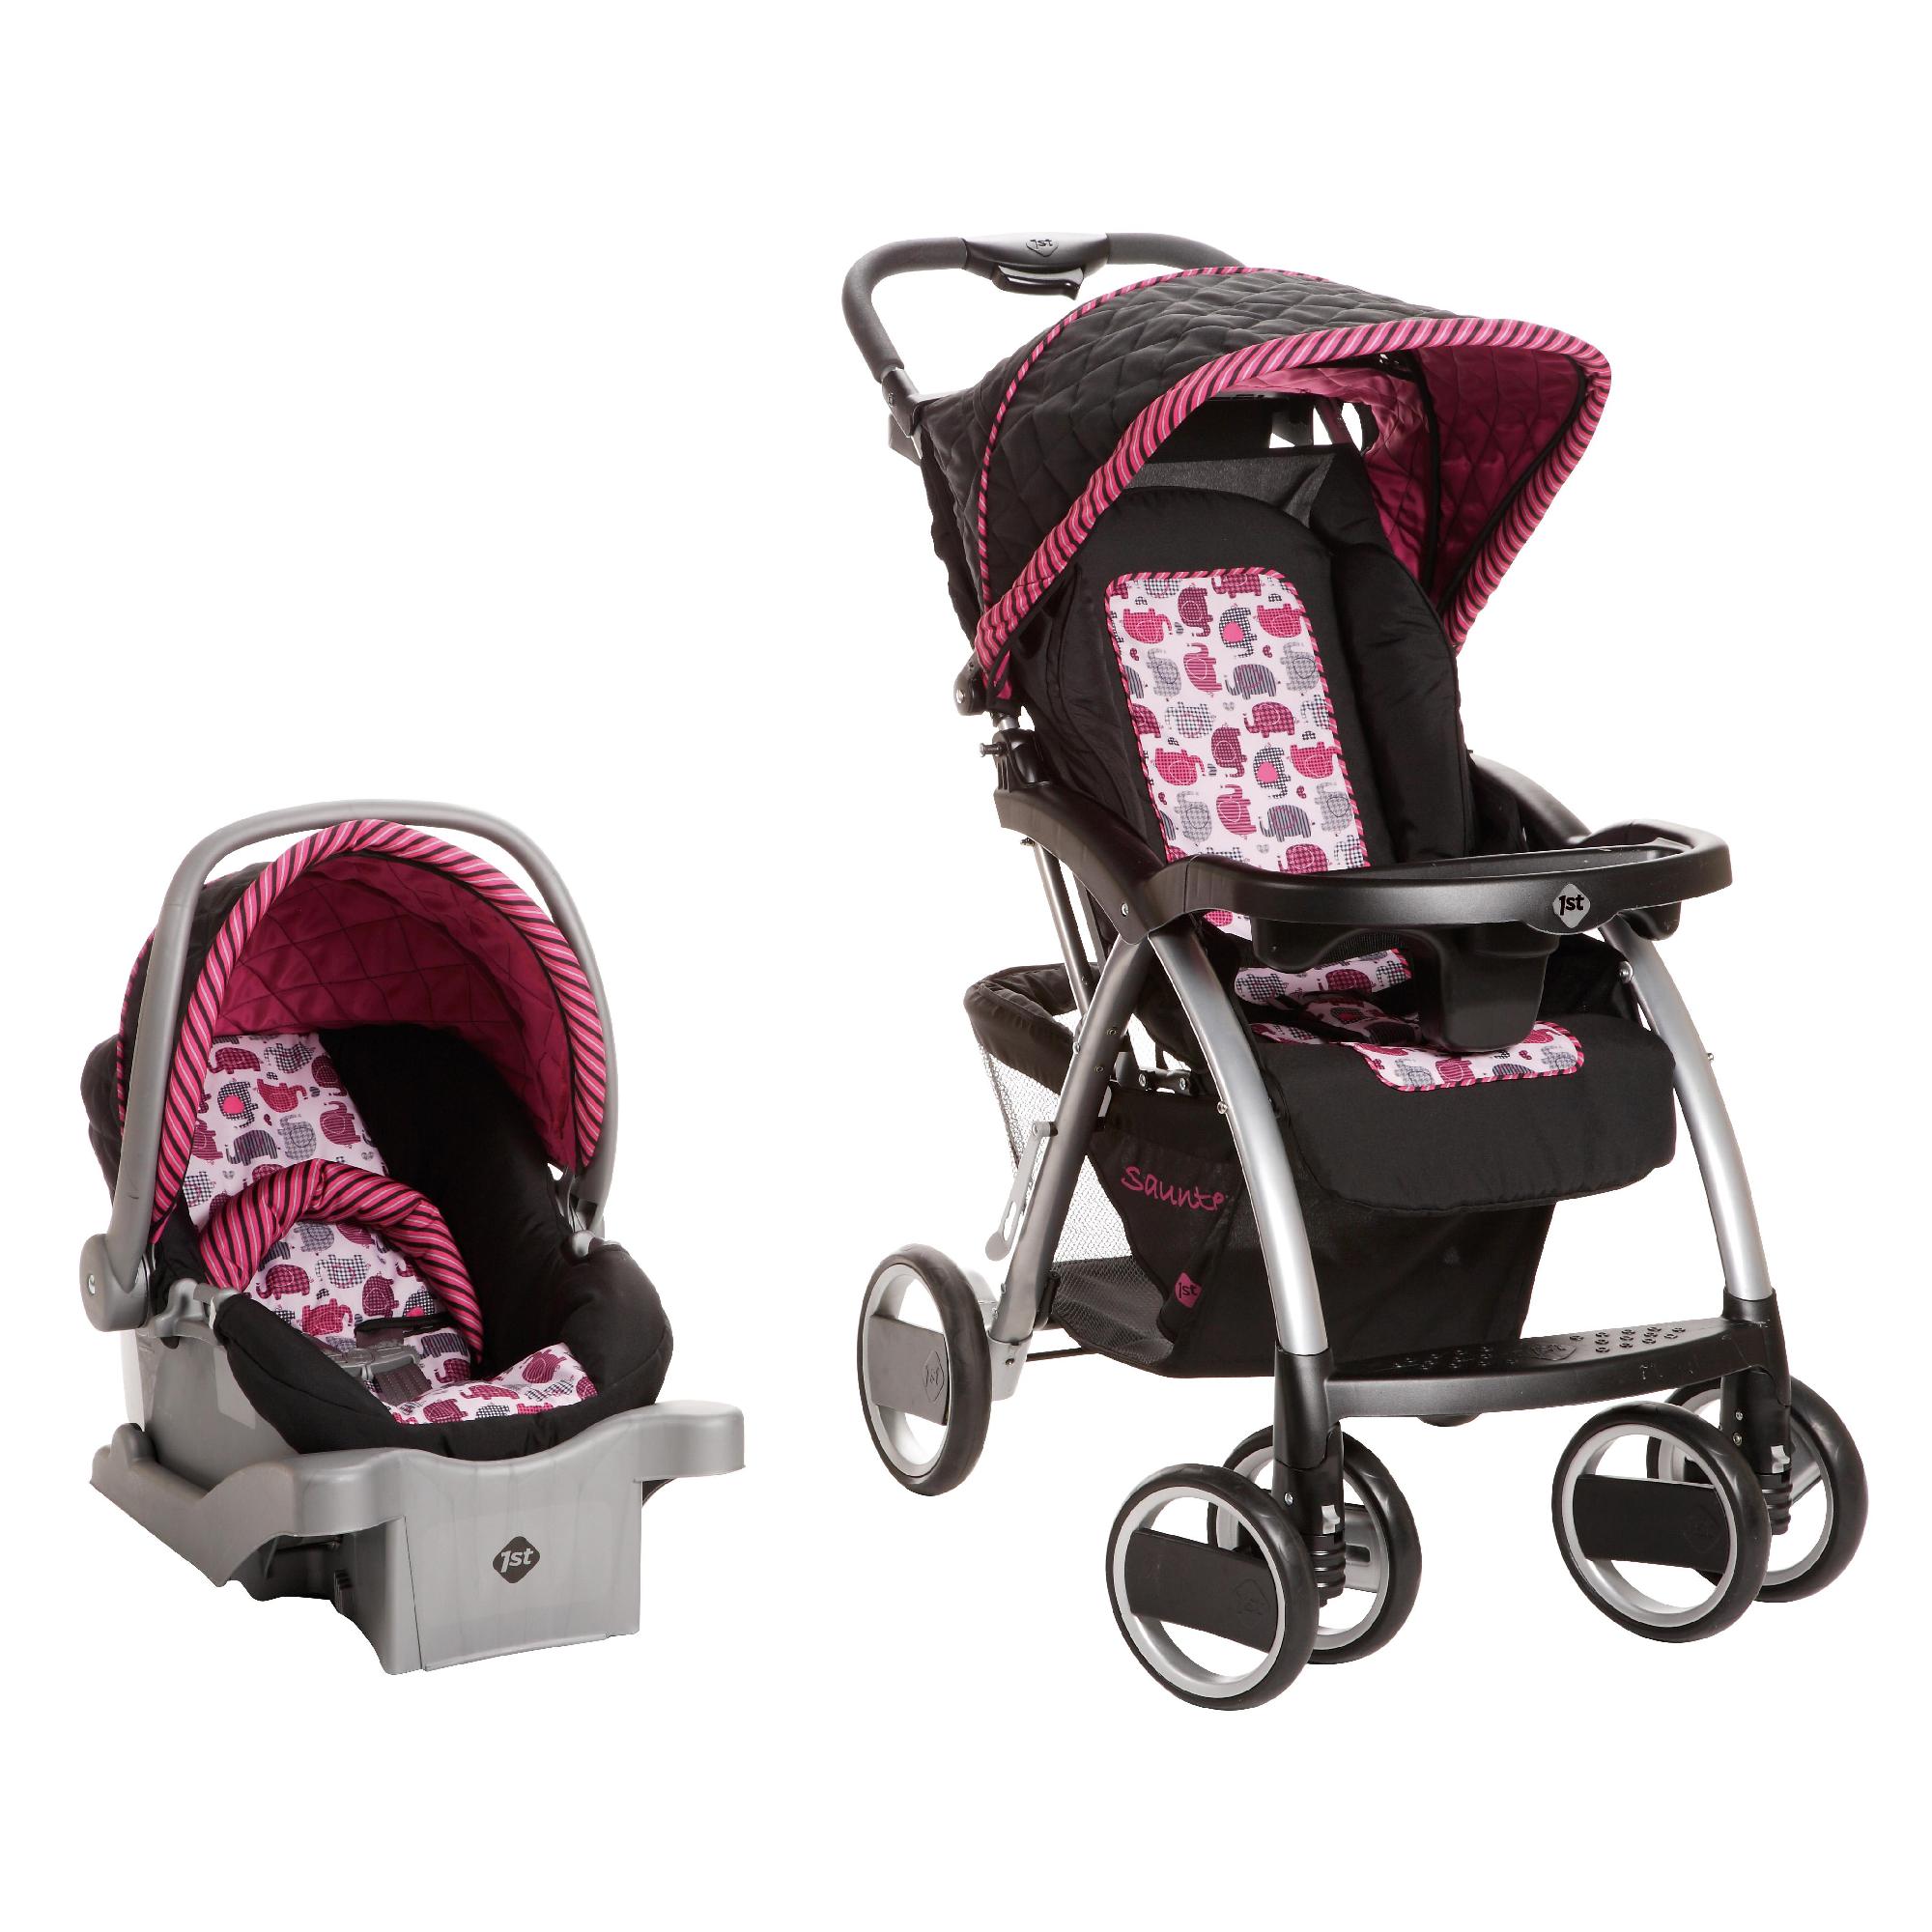 elephant car seat and stroller